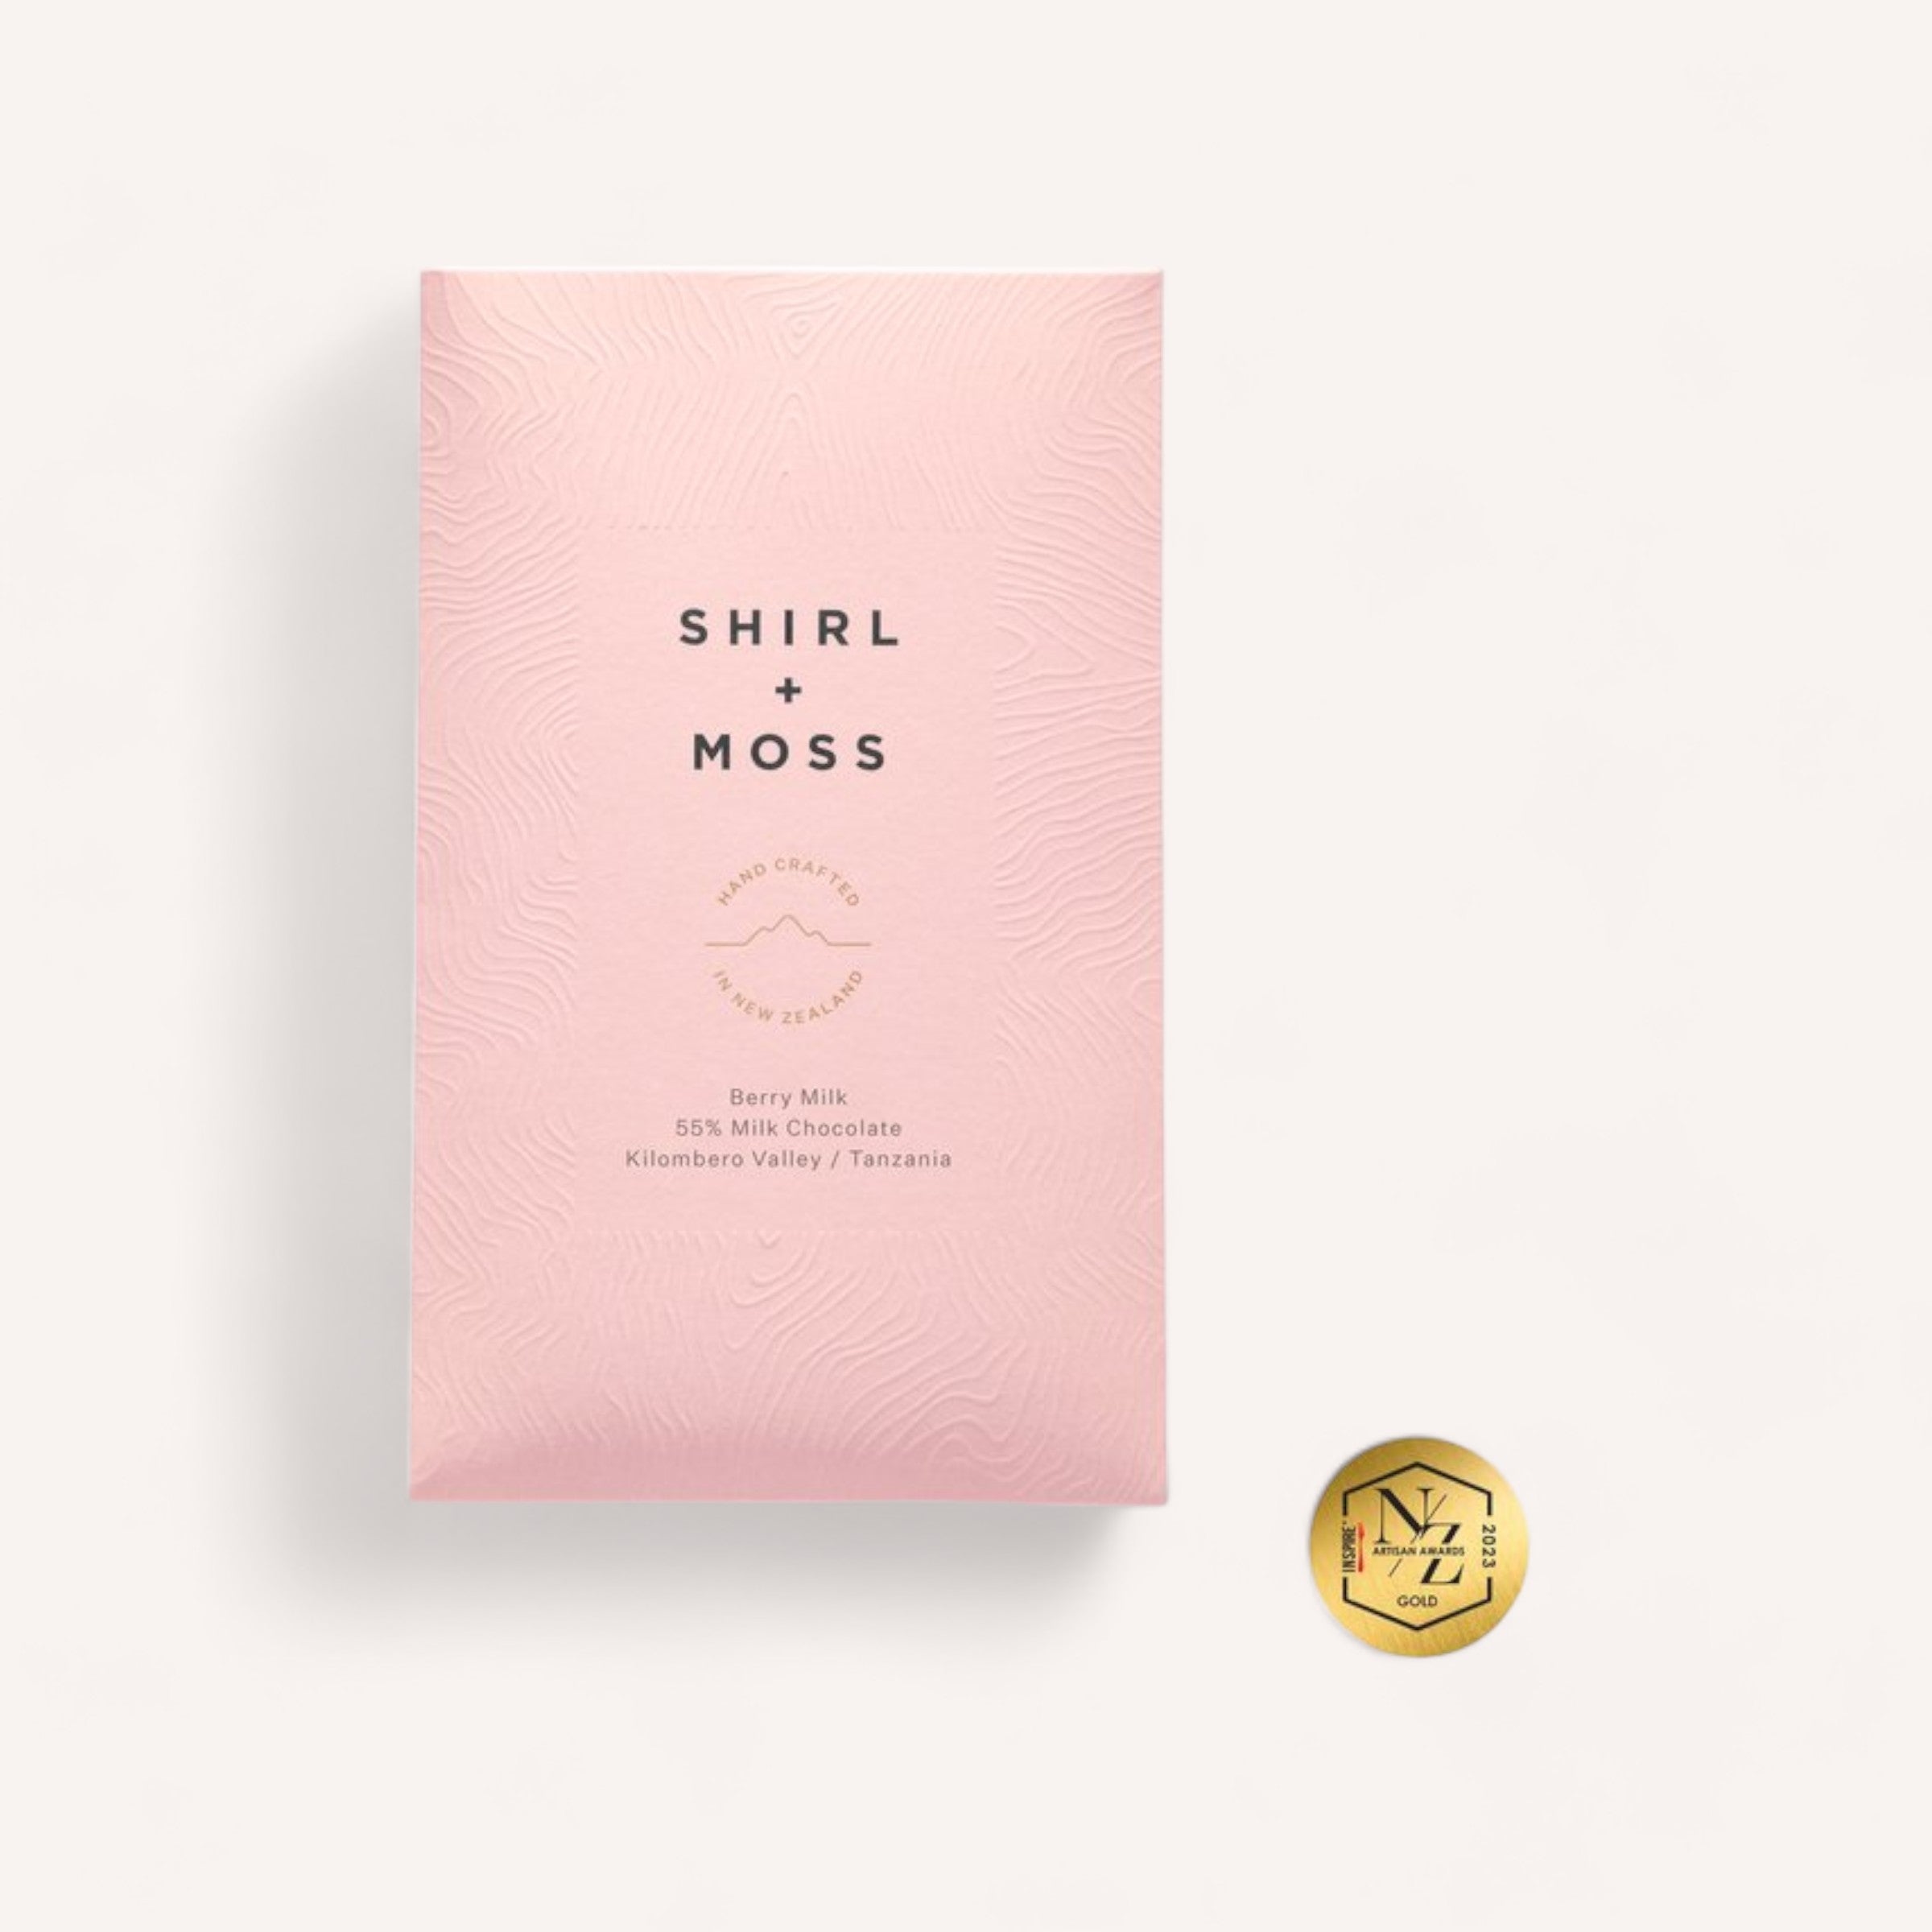 A single Berry Milk Chocolate bar wrapper with elegant text overlay, accompanied by a gold embossed seal on a clean, white background by Shirl & Moss.